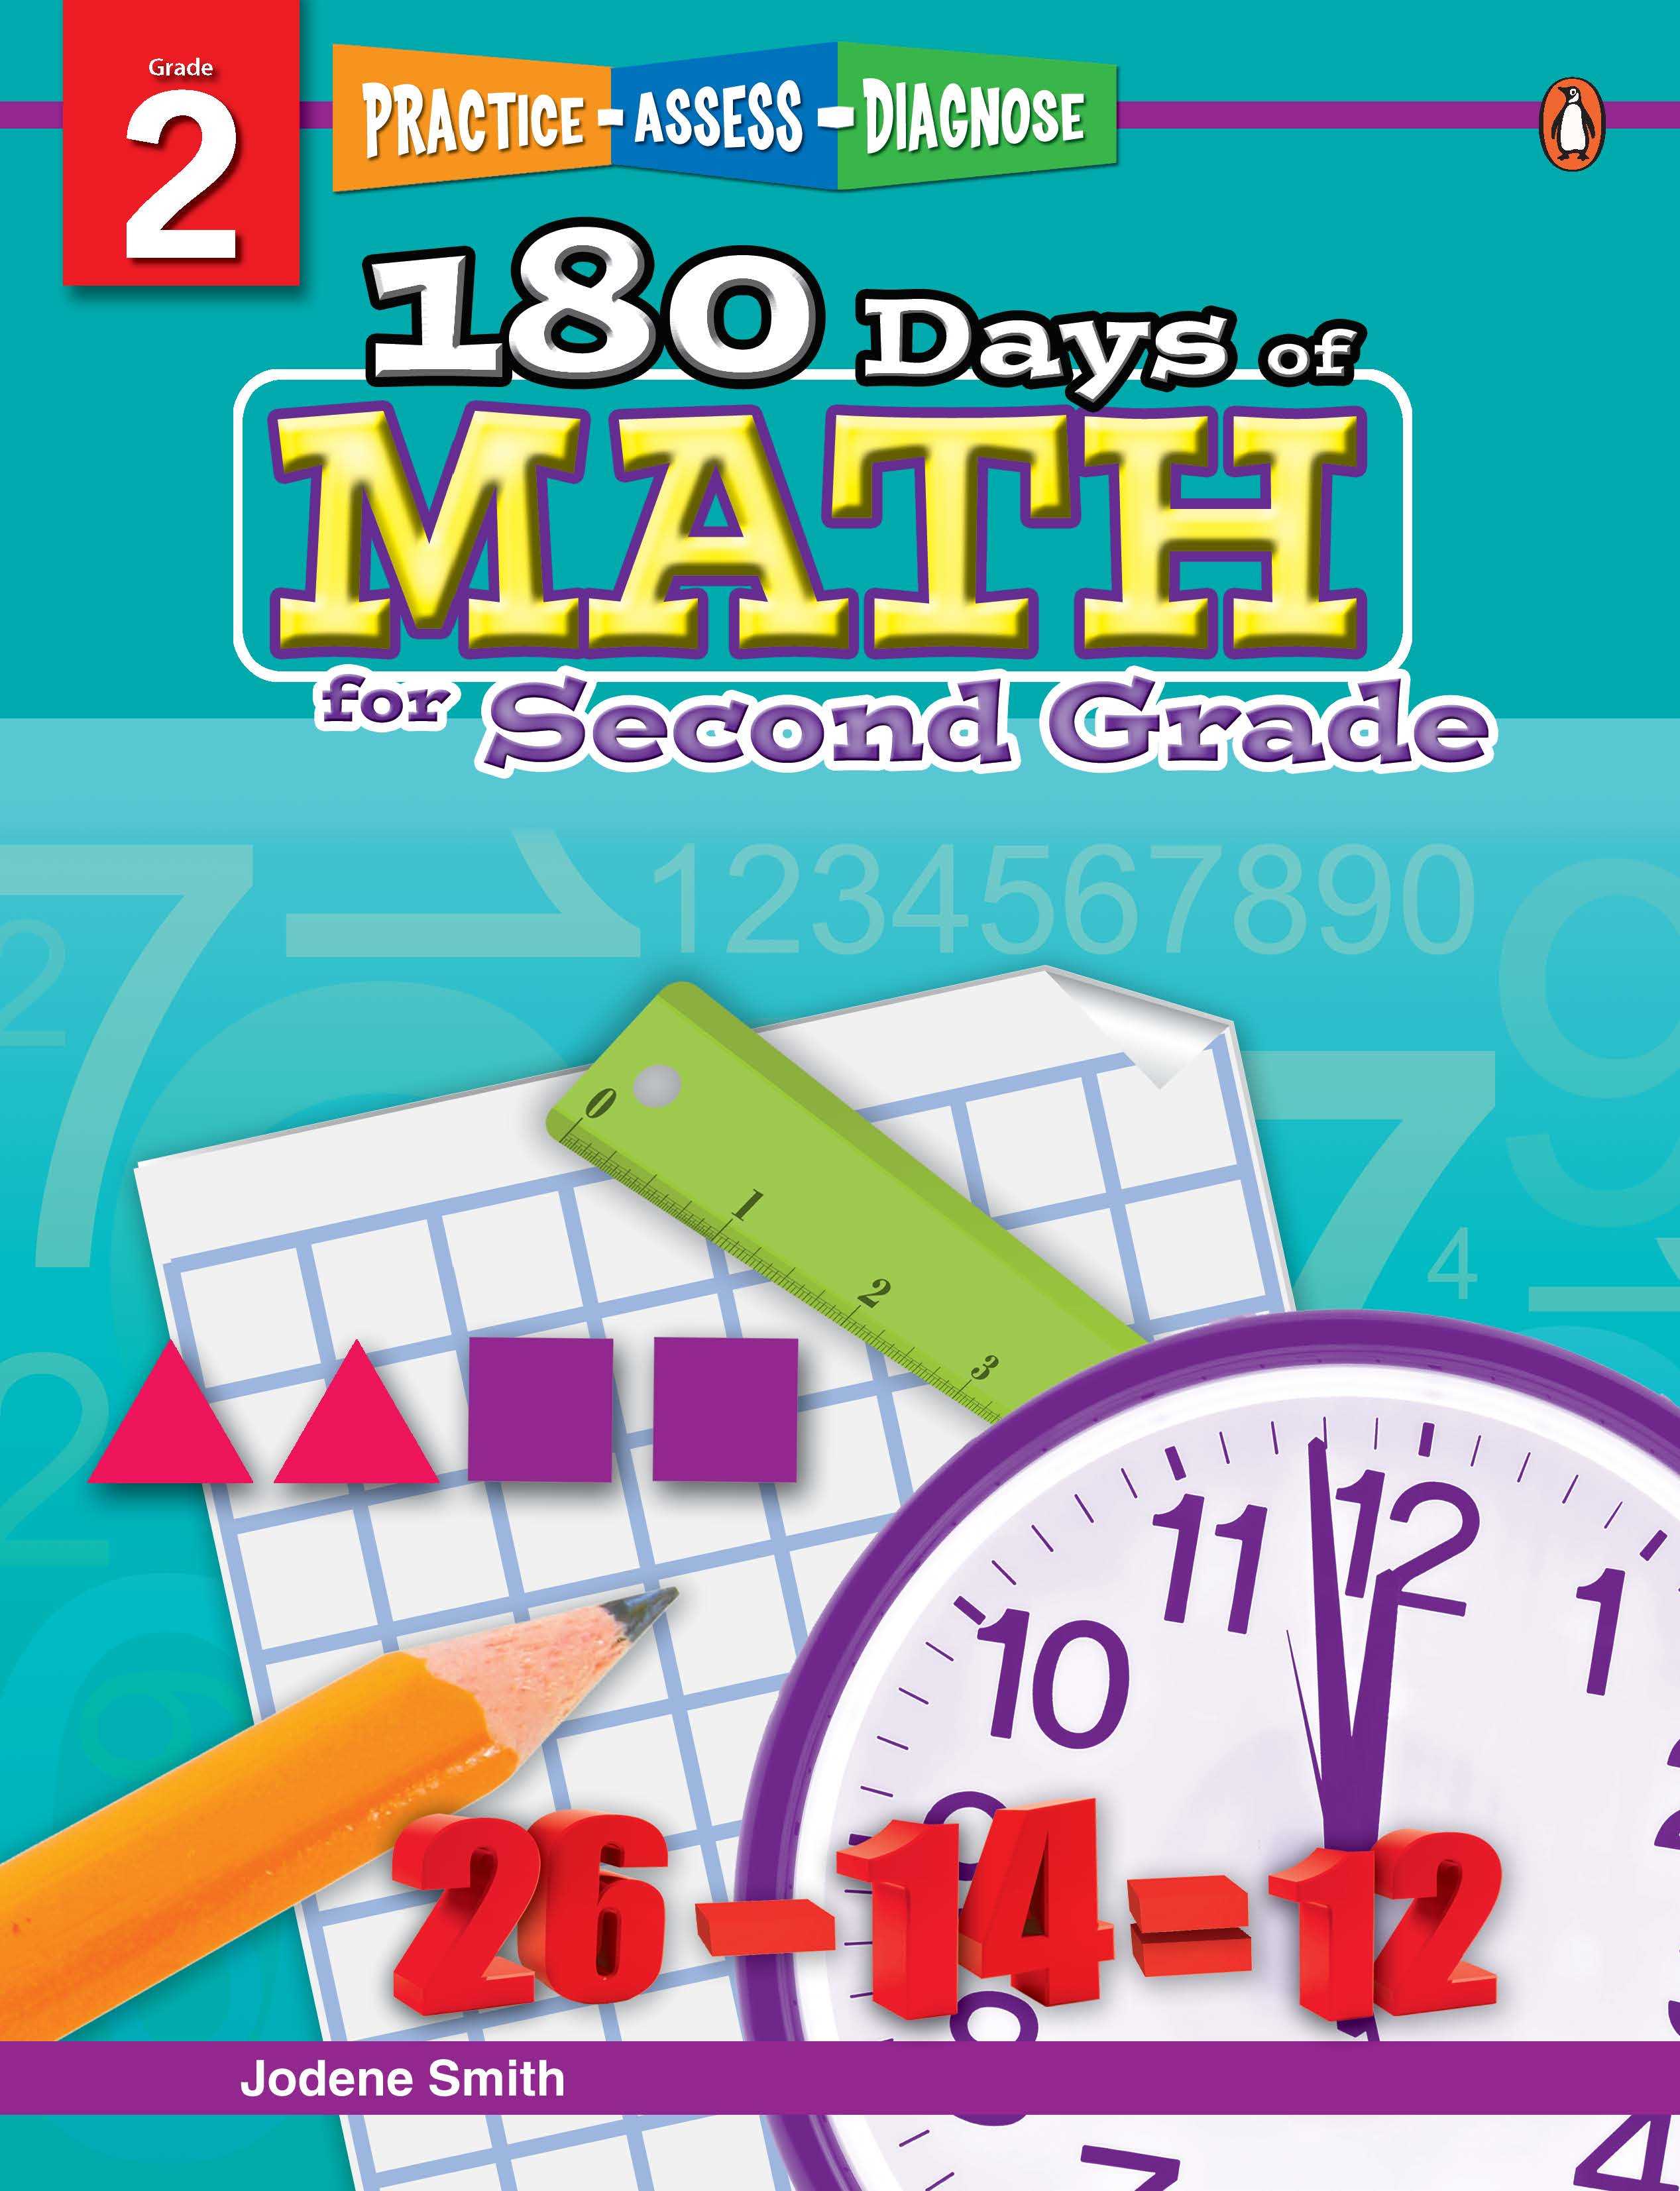 180 Days of Math Series for Second Grade